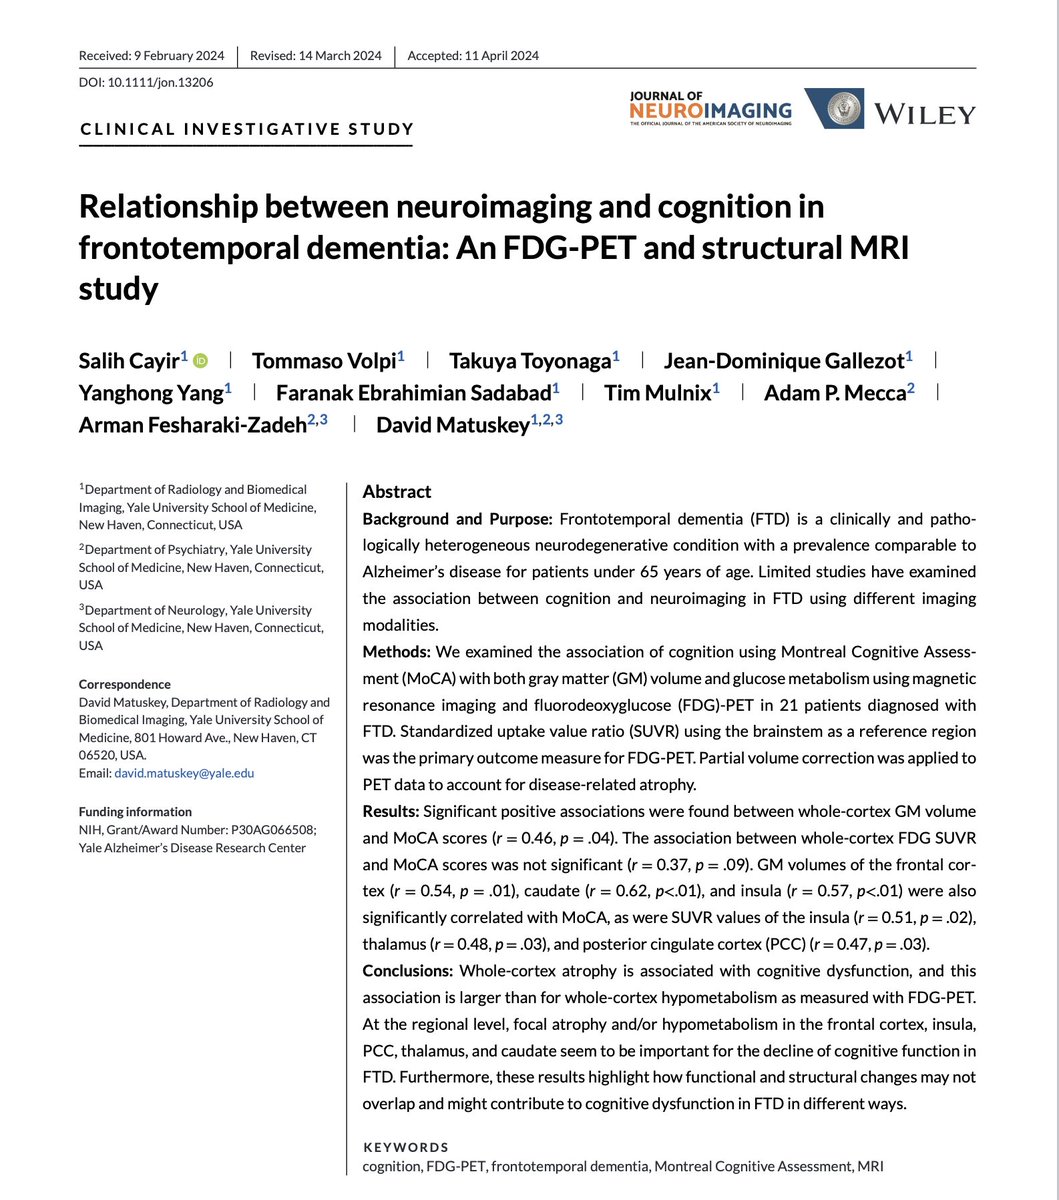 Check out our most recent publication on neuroimaging and cognitive performance in frontotemporal dementia! 🧠🧠

#dementia #neurology #neurotwitter #neuroscience #neurorad #radres #pet #memory 

pubmed.ncbi.nlm.nih.gov/38676301/